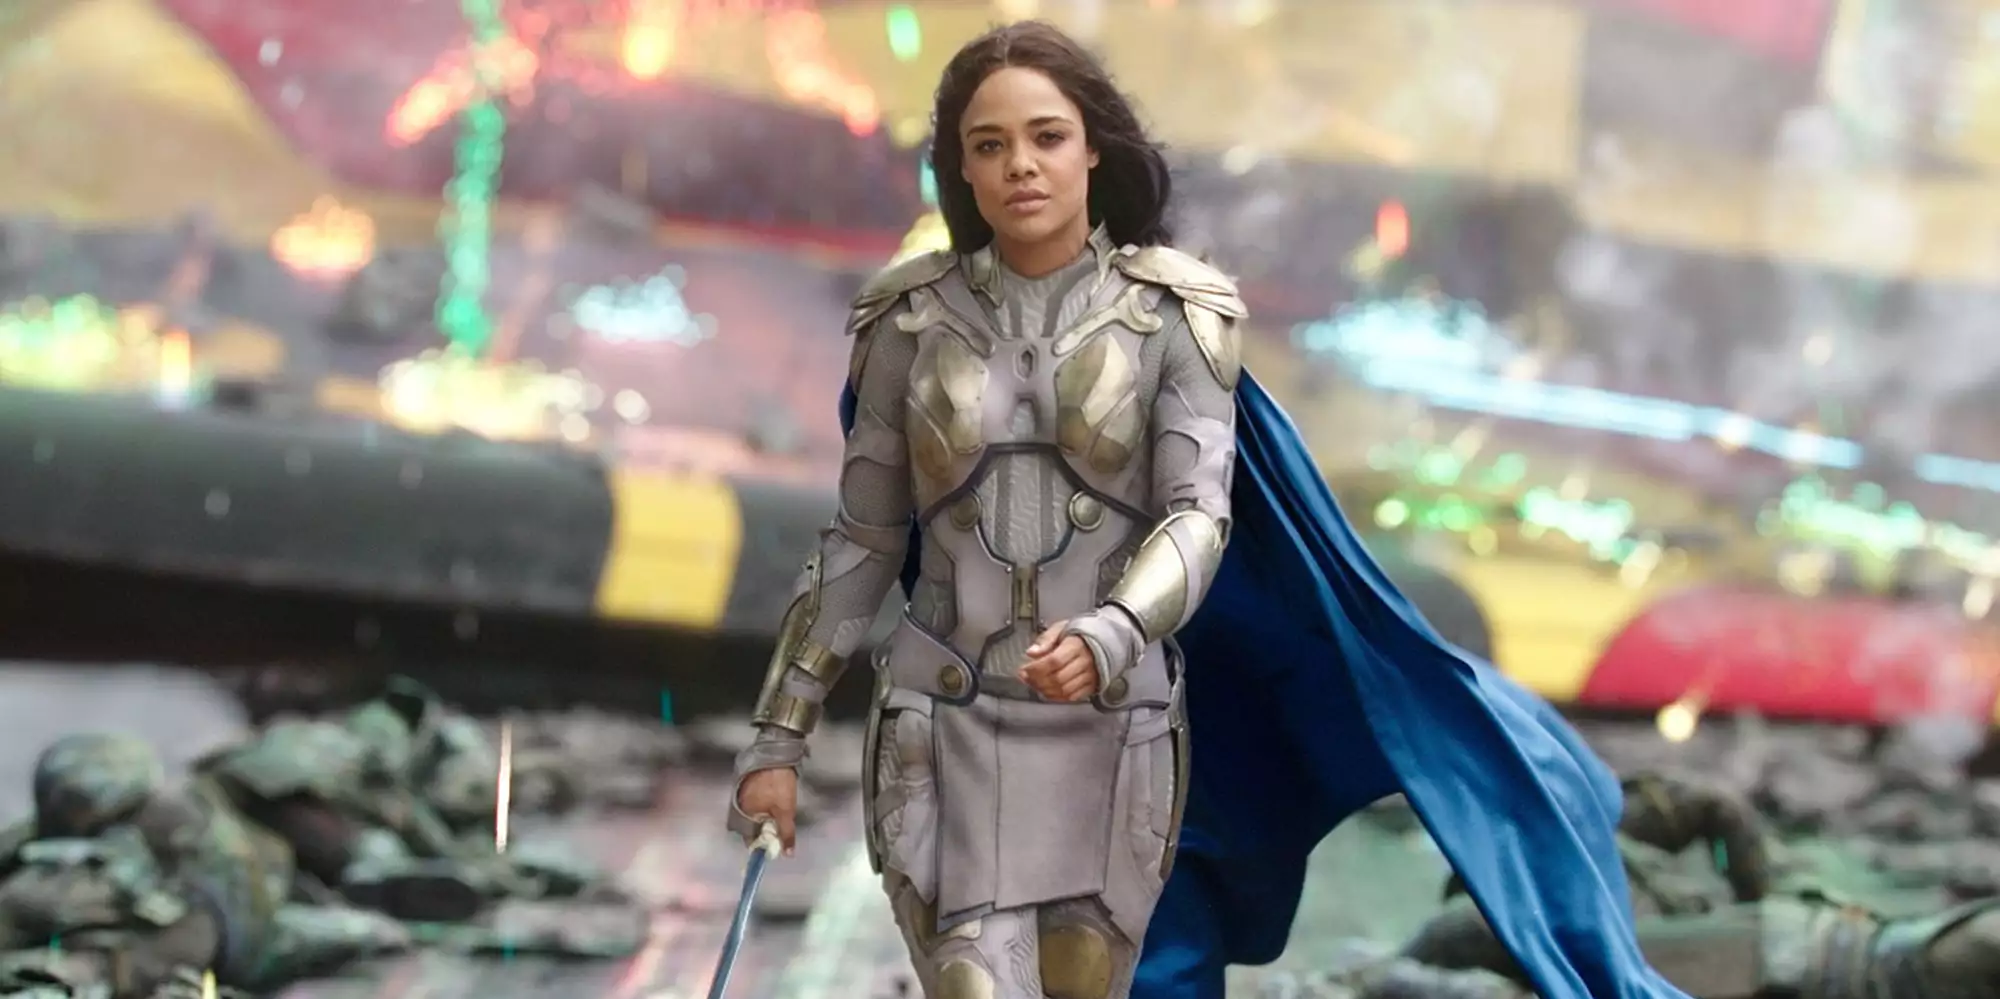 Valkyrie will take Russell Crowe's Zeus' Thunderbolt in Love and Thunder